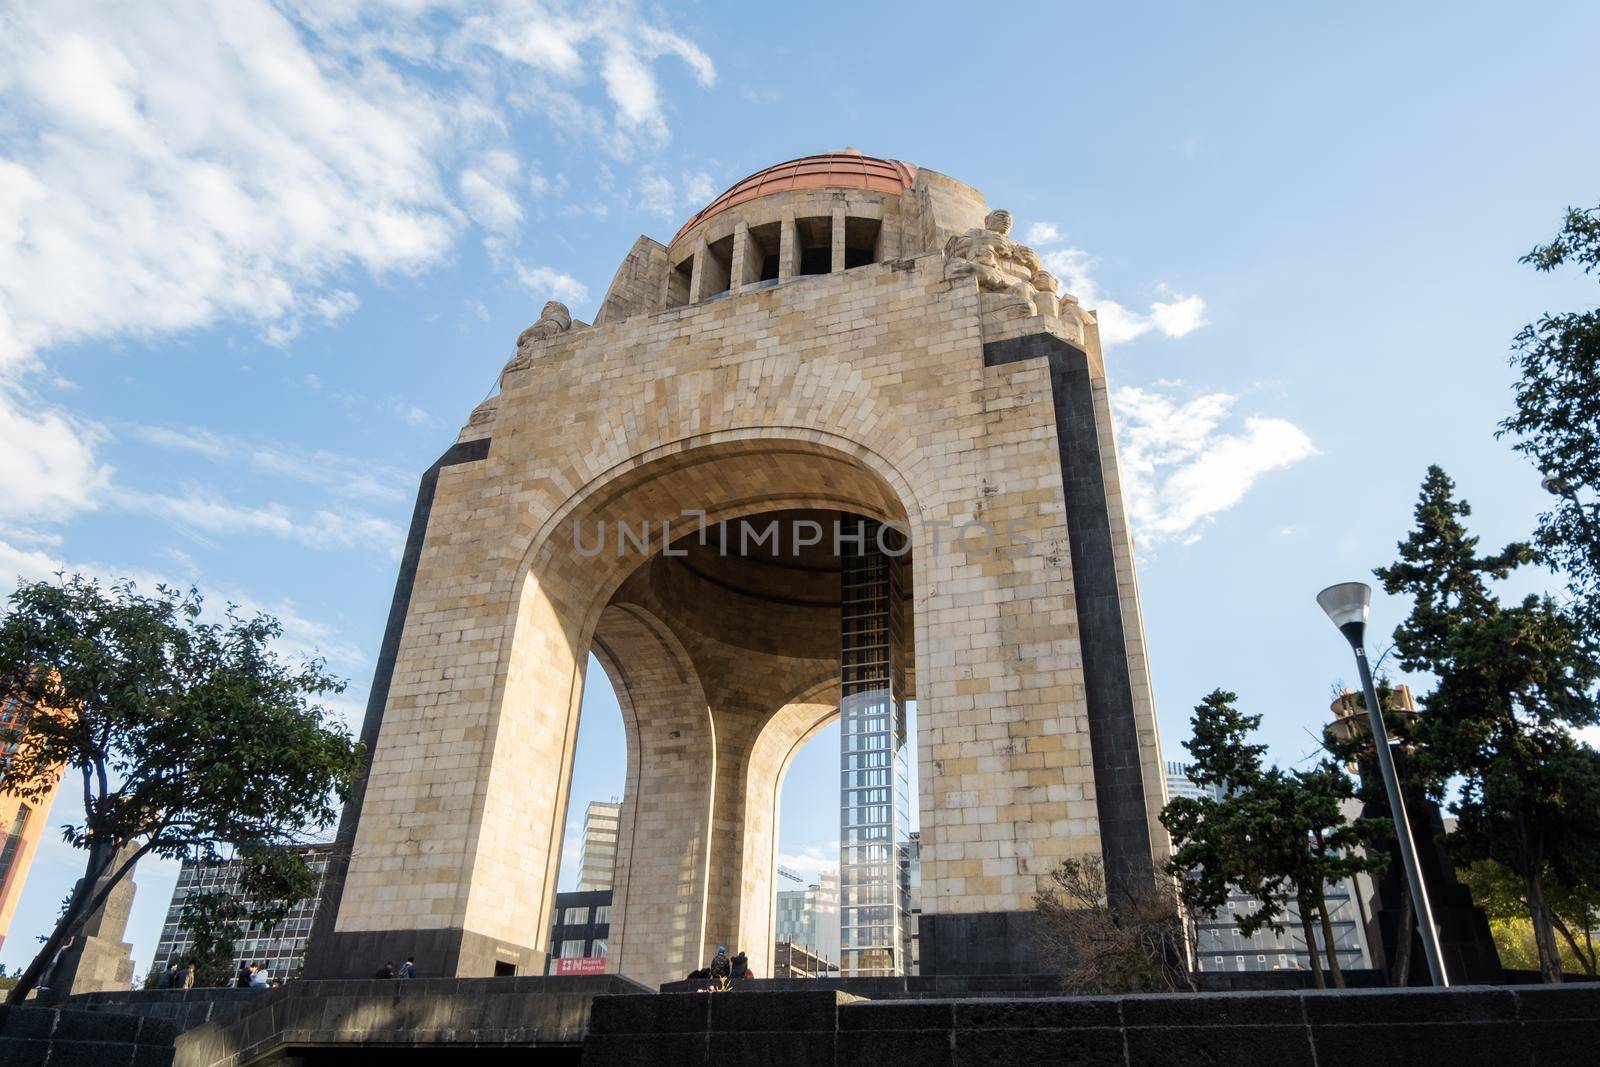 Mexico City, Mexico - January 13, 2021: Low angle view of Monument to the Revolution under a beautiful blue sky. Majestic triumphal arch in Mexico City surrounded by trees. Mexican landmarks